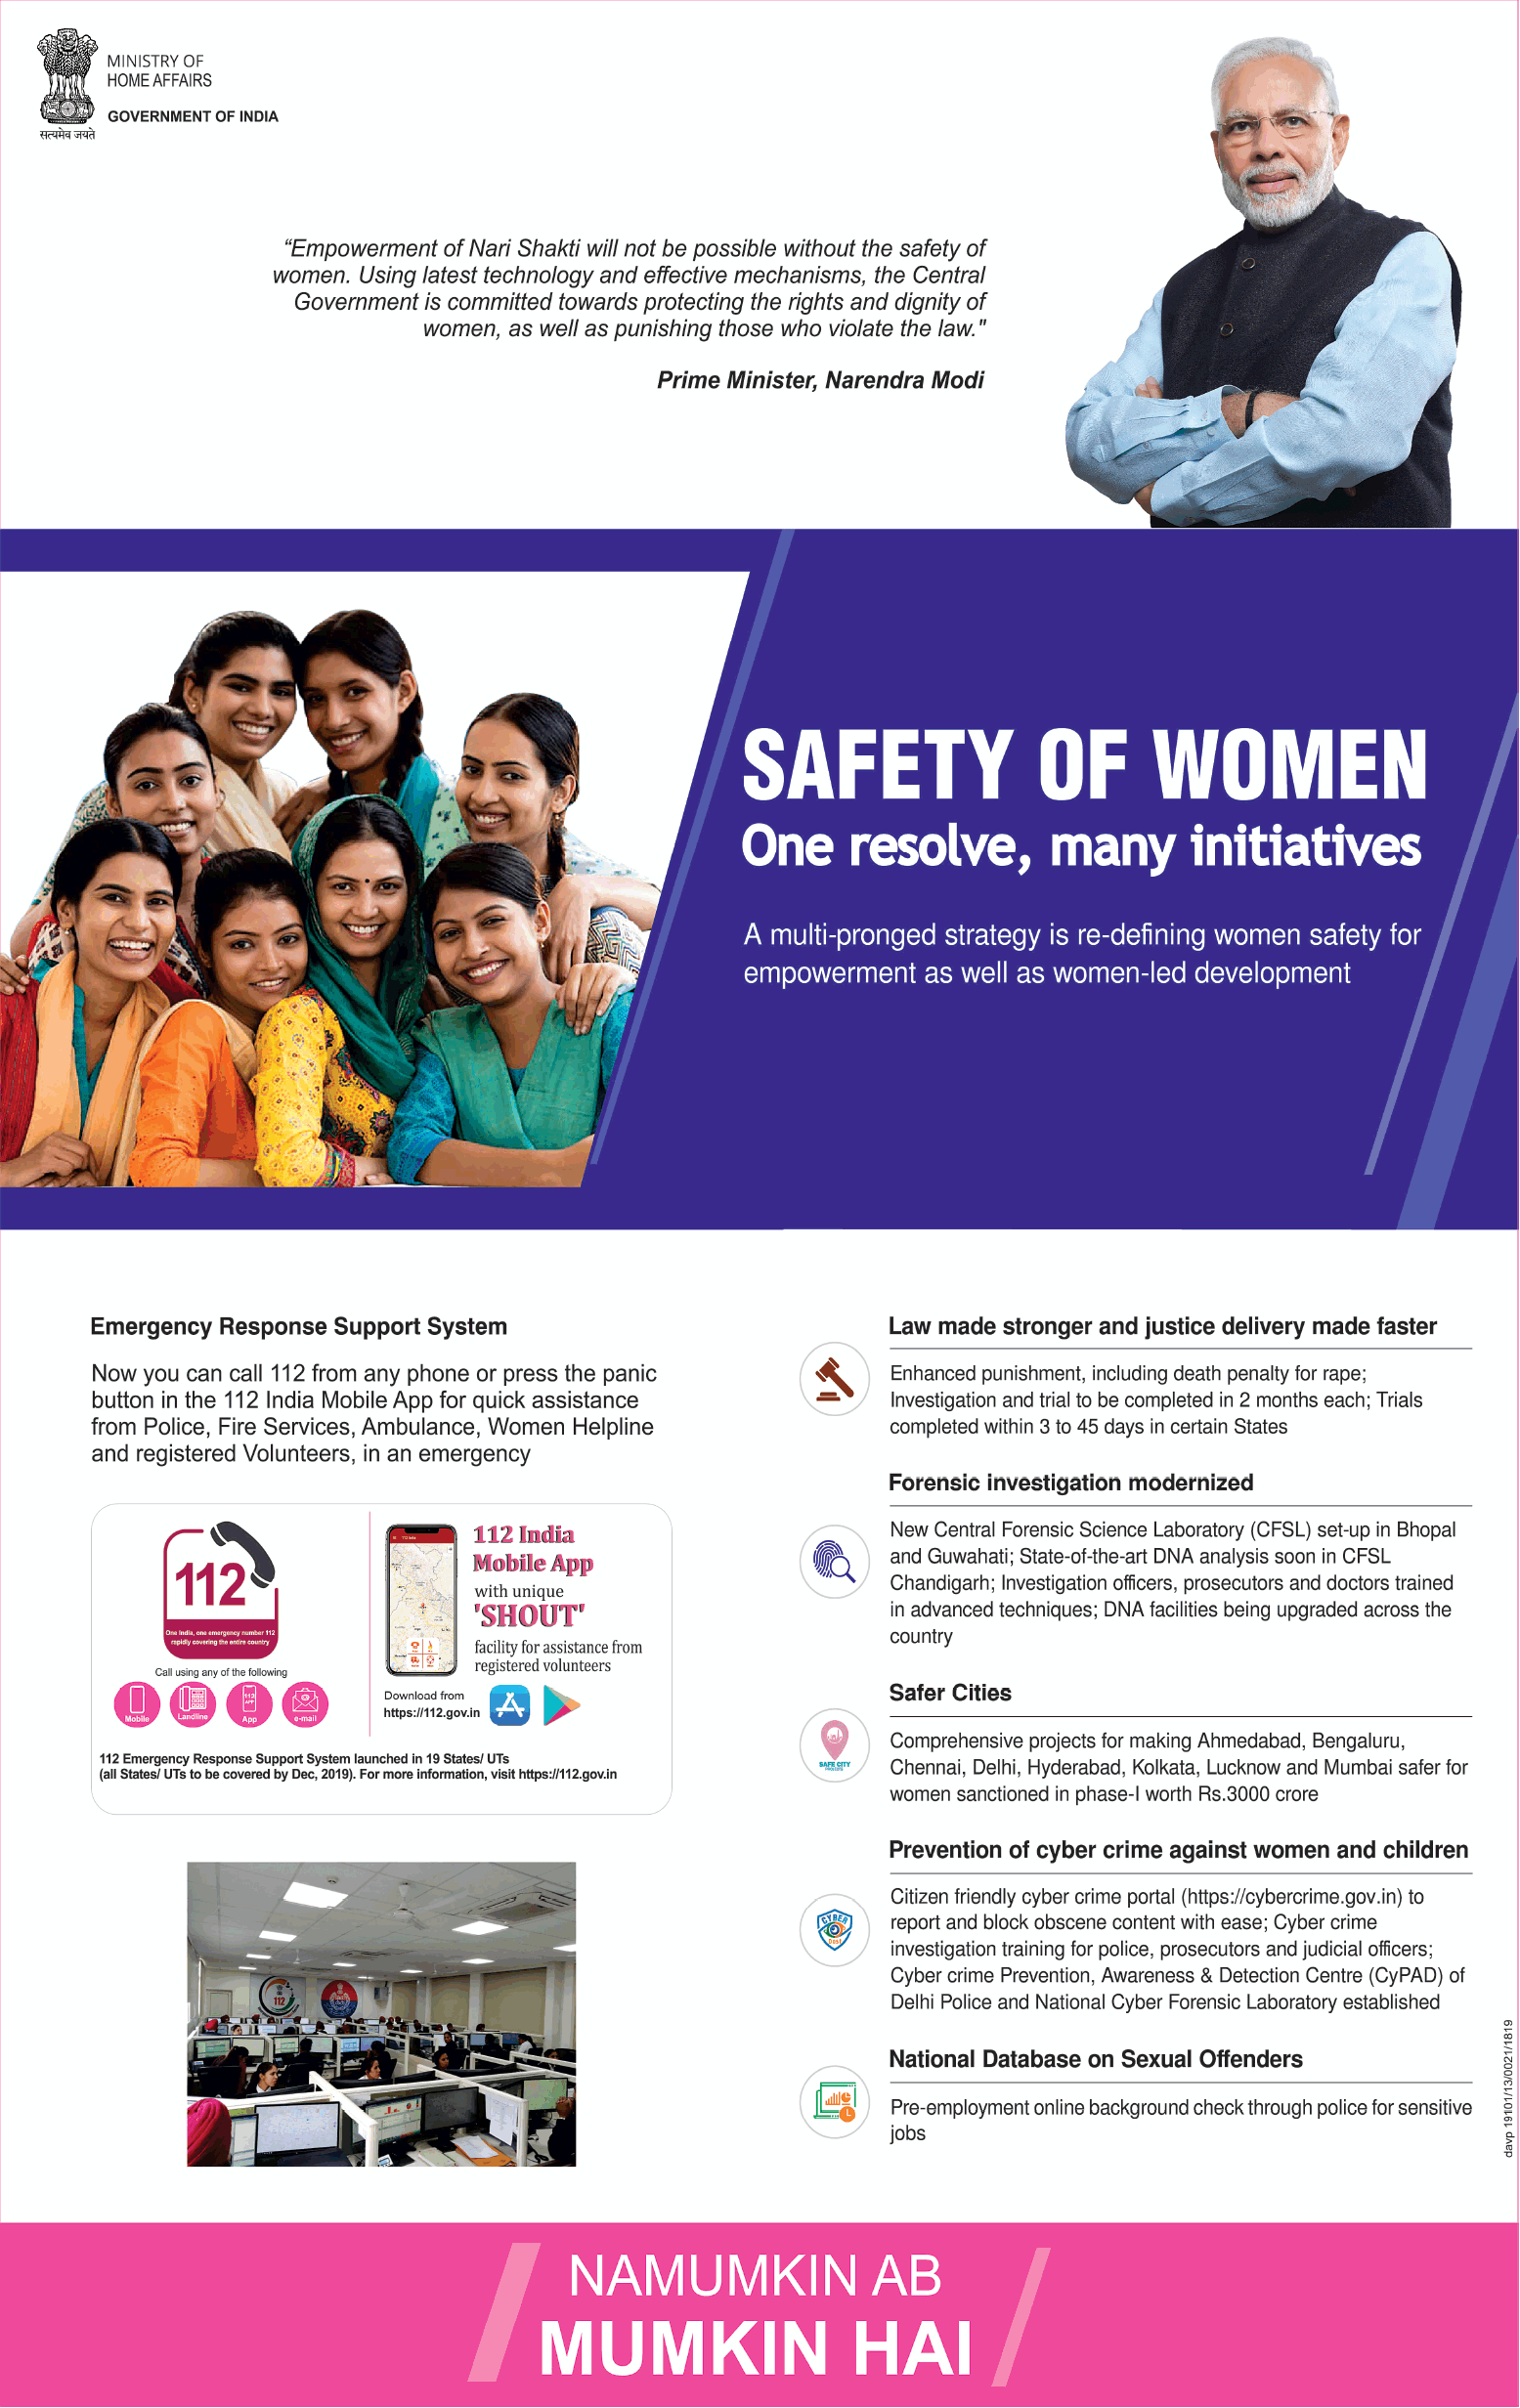 government-of-india-safety-of-women-onw-resolve-many-initiatives-ad-bombay-times-06-03-2019.png